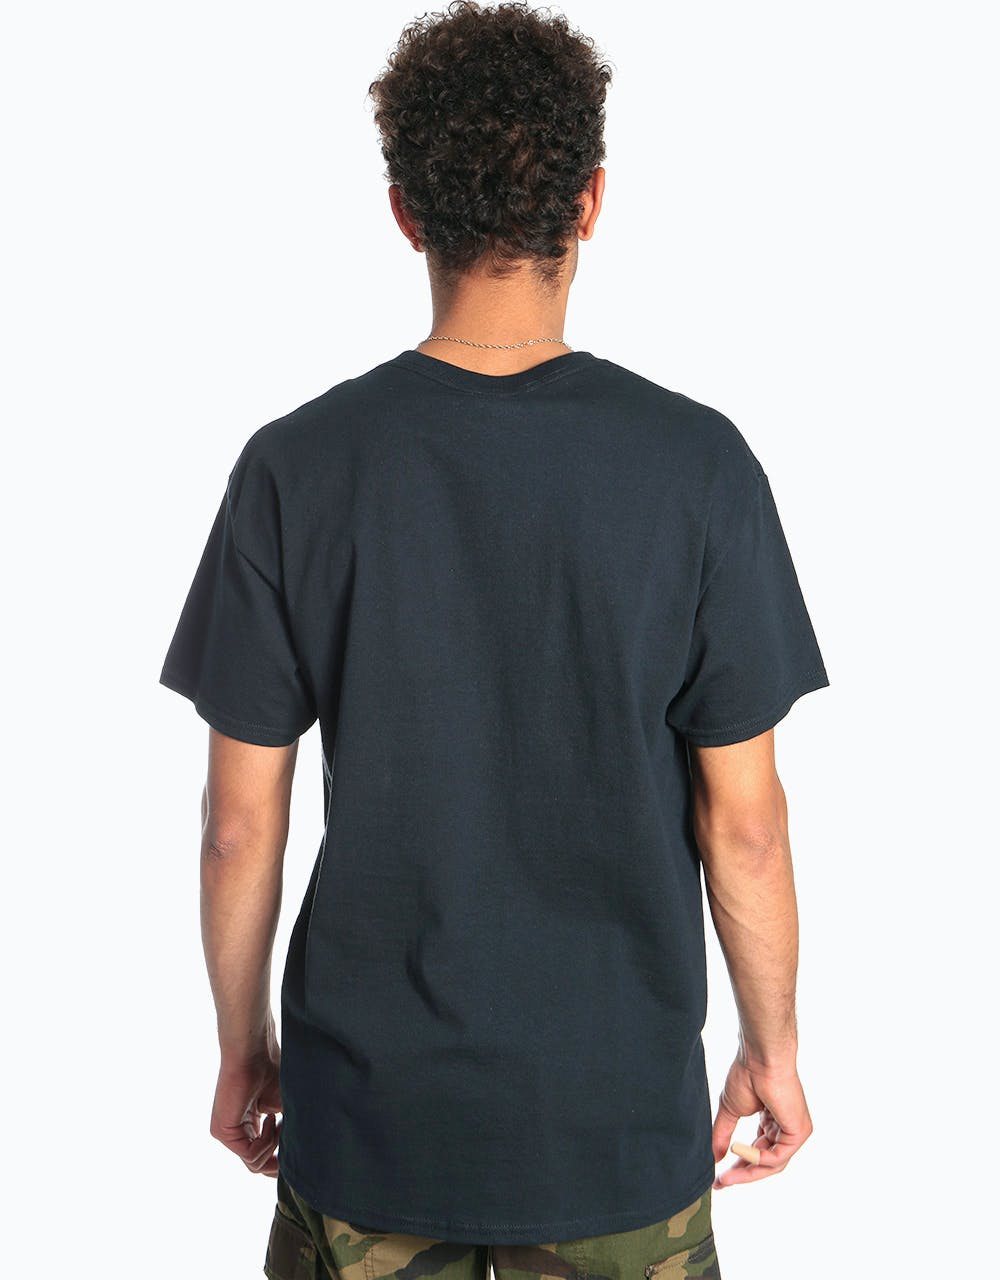 Route One Roses T-Shirt - Black